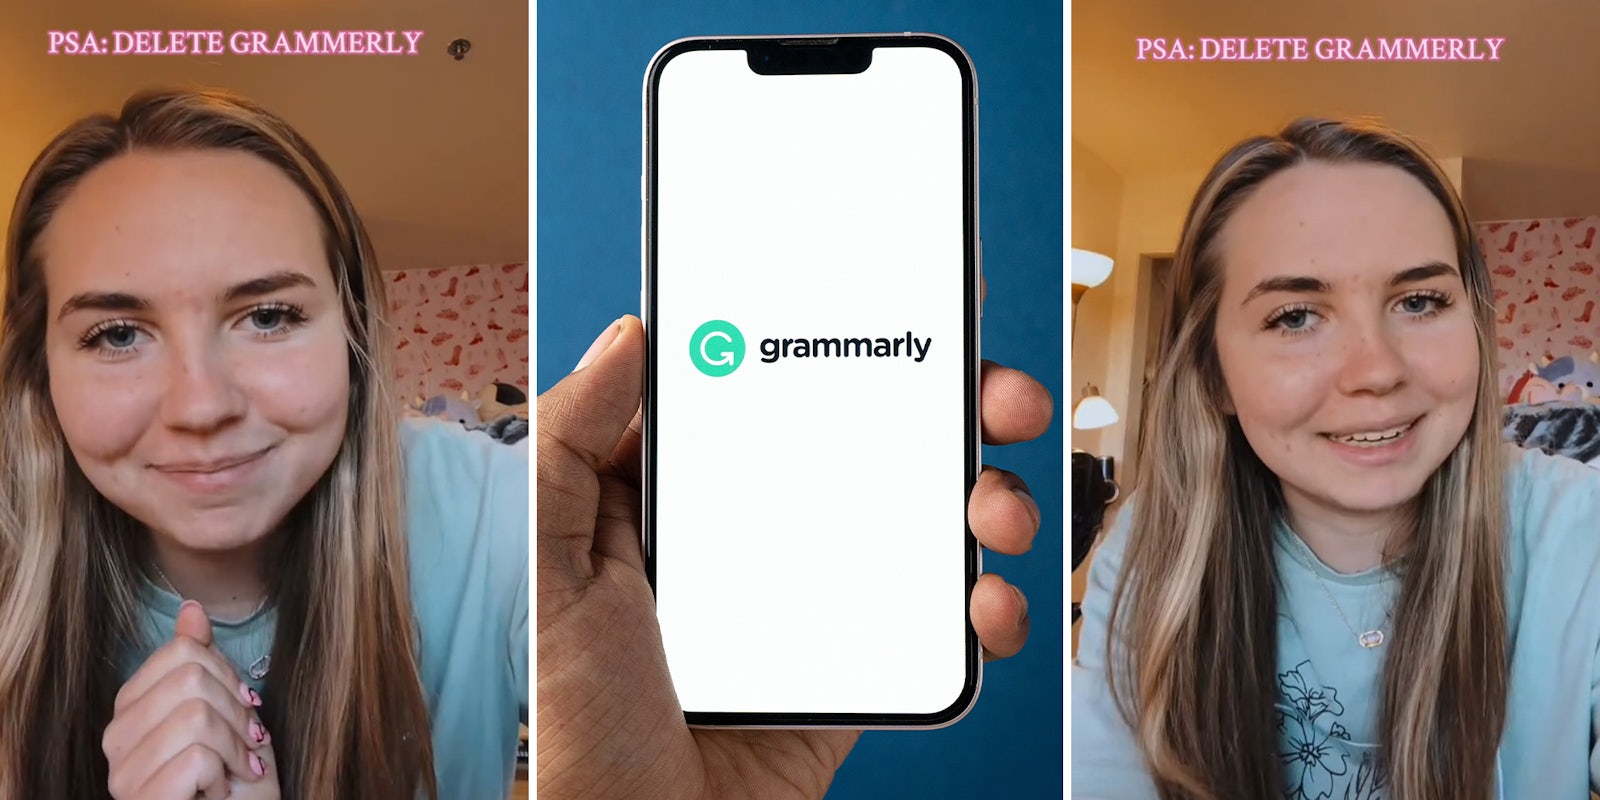 Student says she failed a paper because she used Grammarly